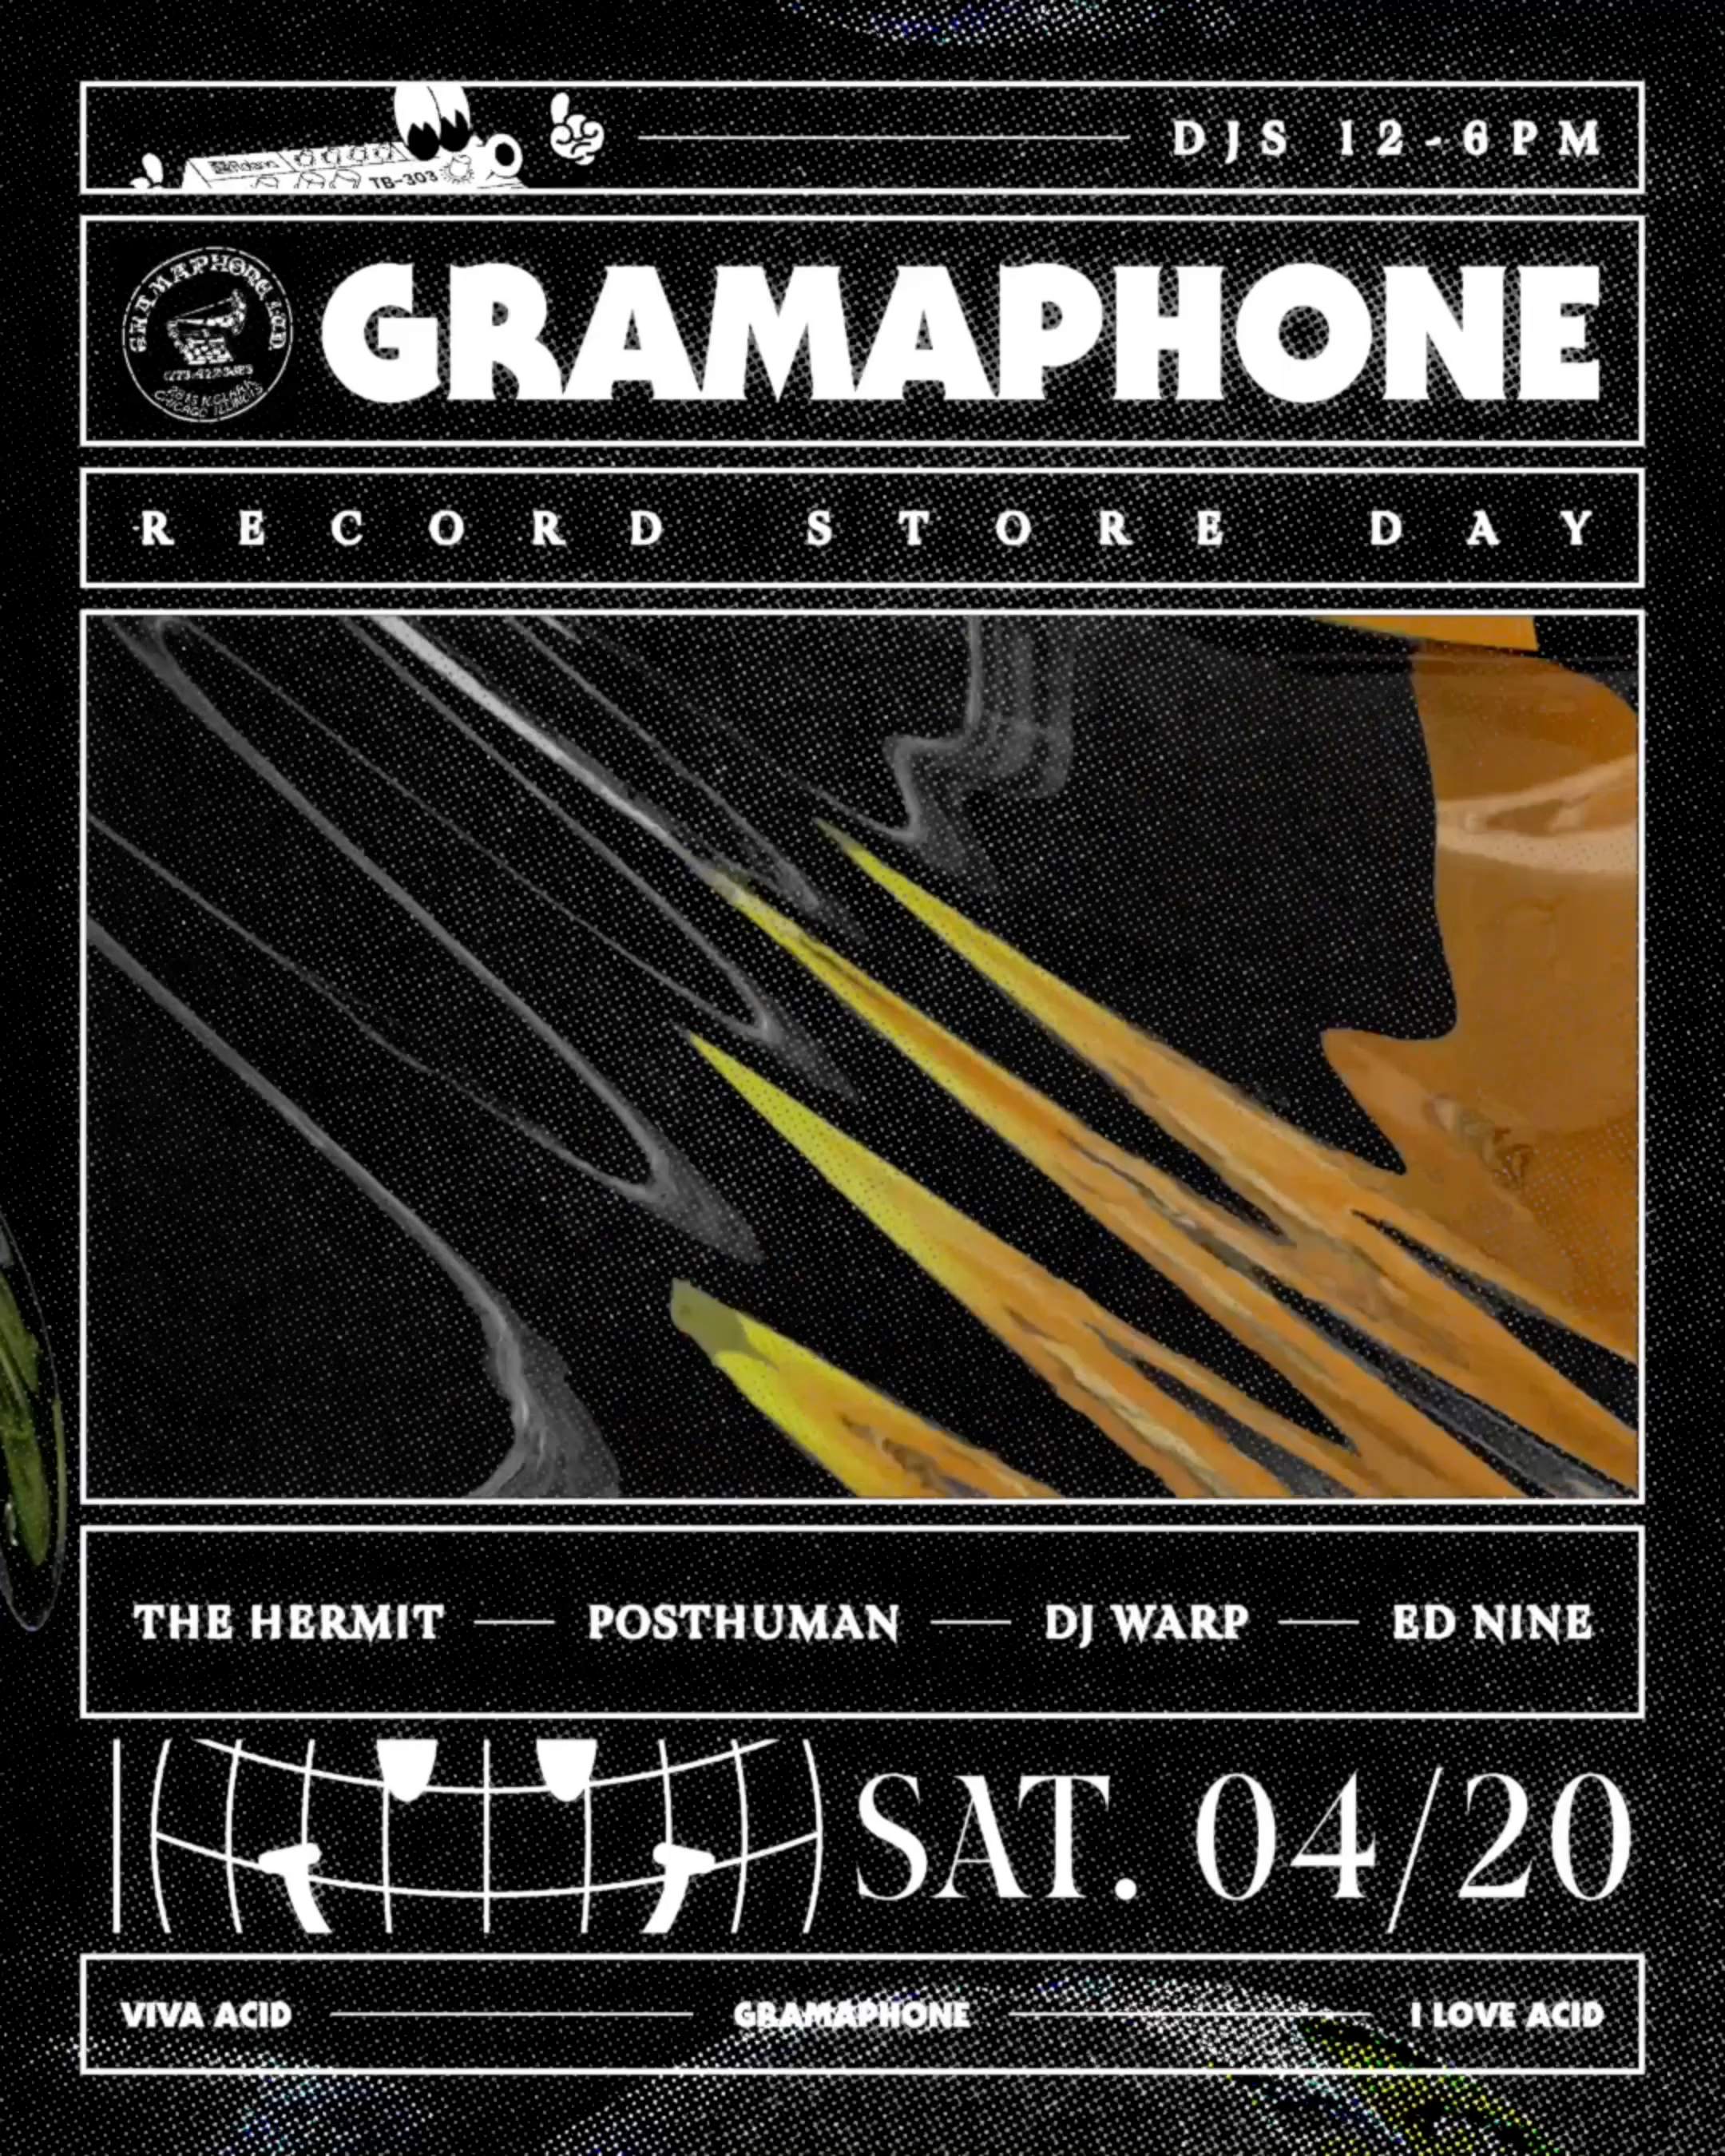 Gramaphone Record Store Day - フライヤー表